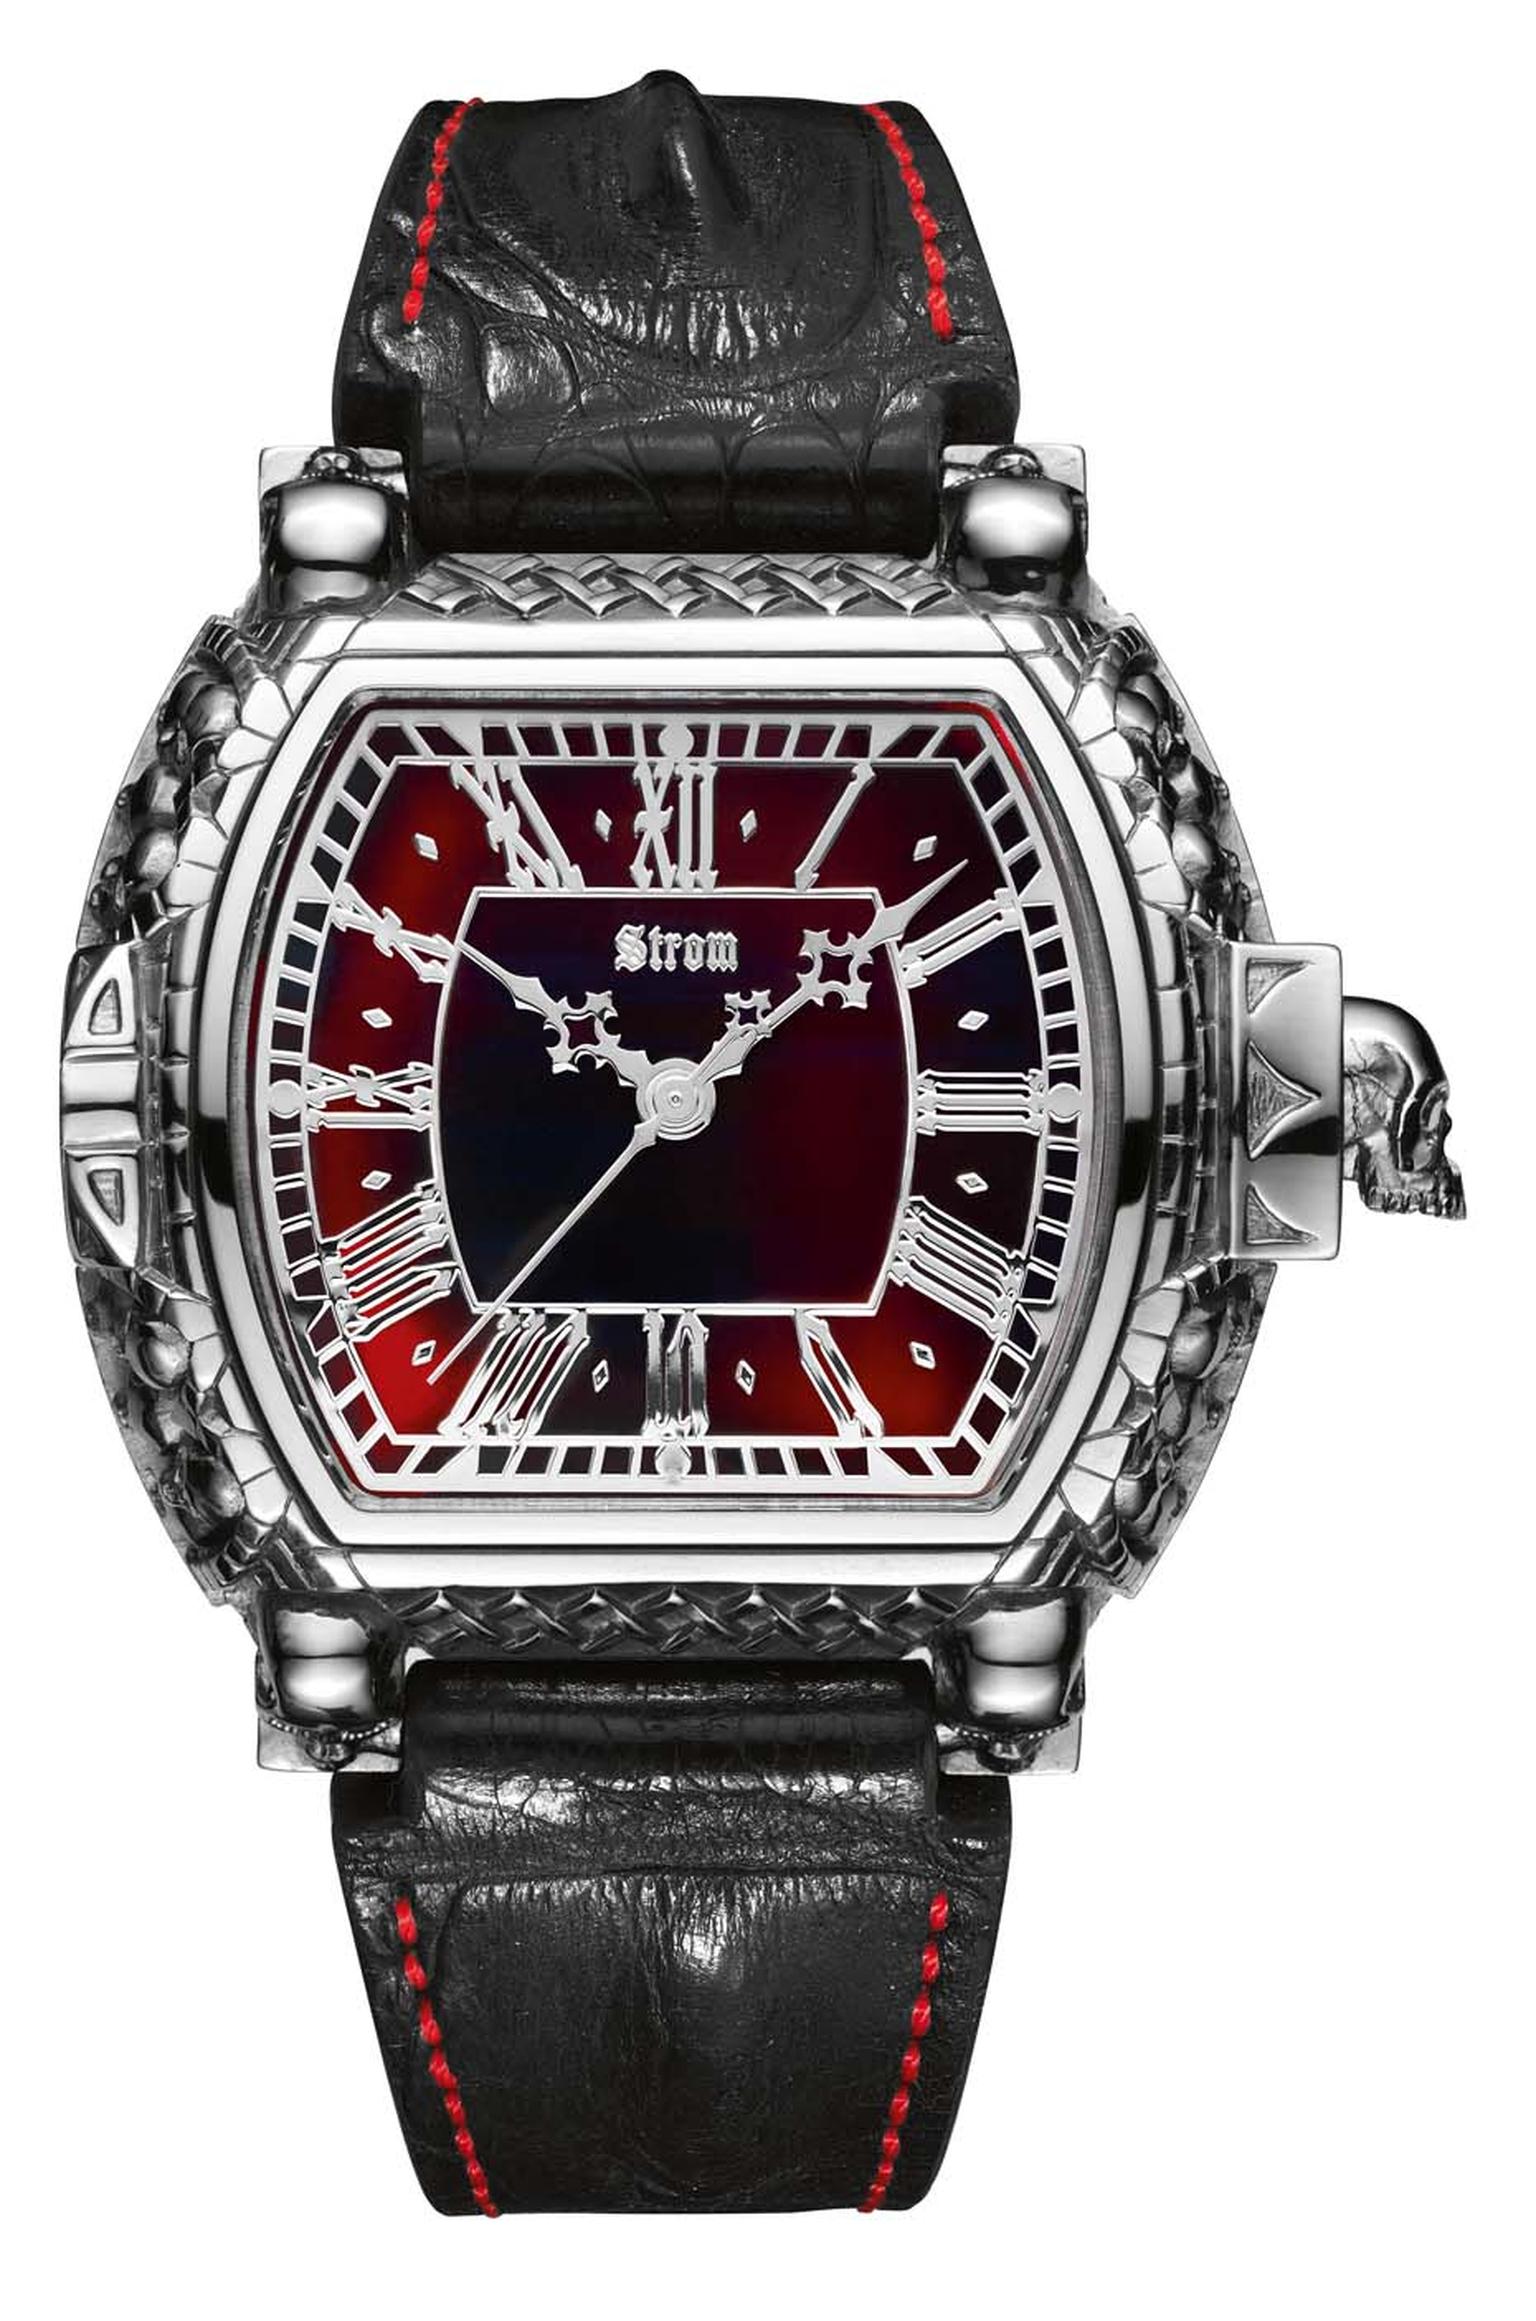 Strom watches has released the Memento Mori, Carpe Noctem watch featuring miniature skulls with ruby-encrusted eyes sculpted into the silver case.